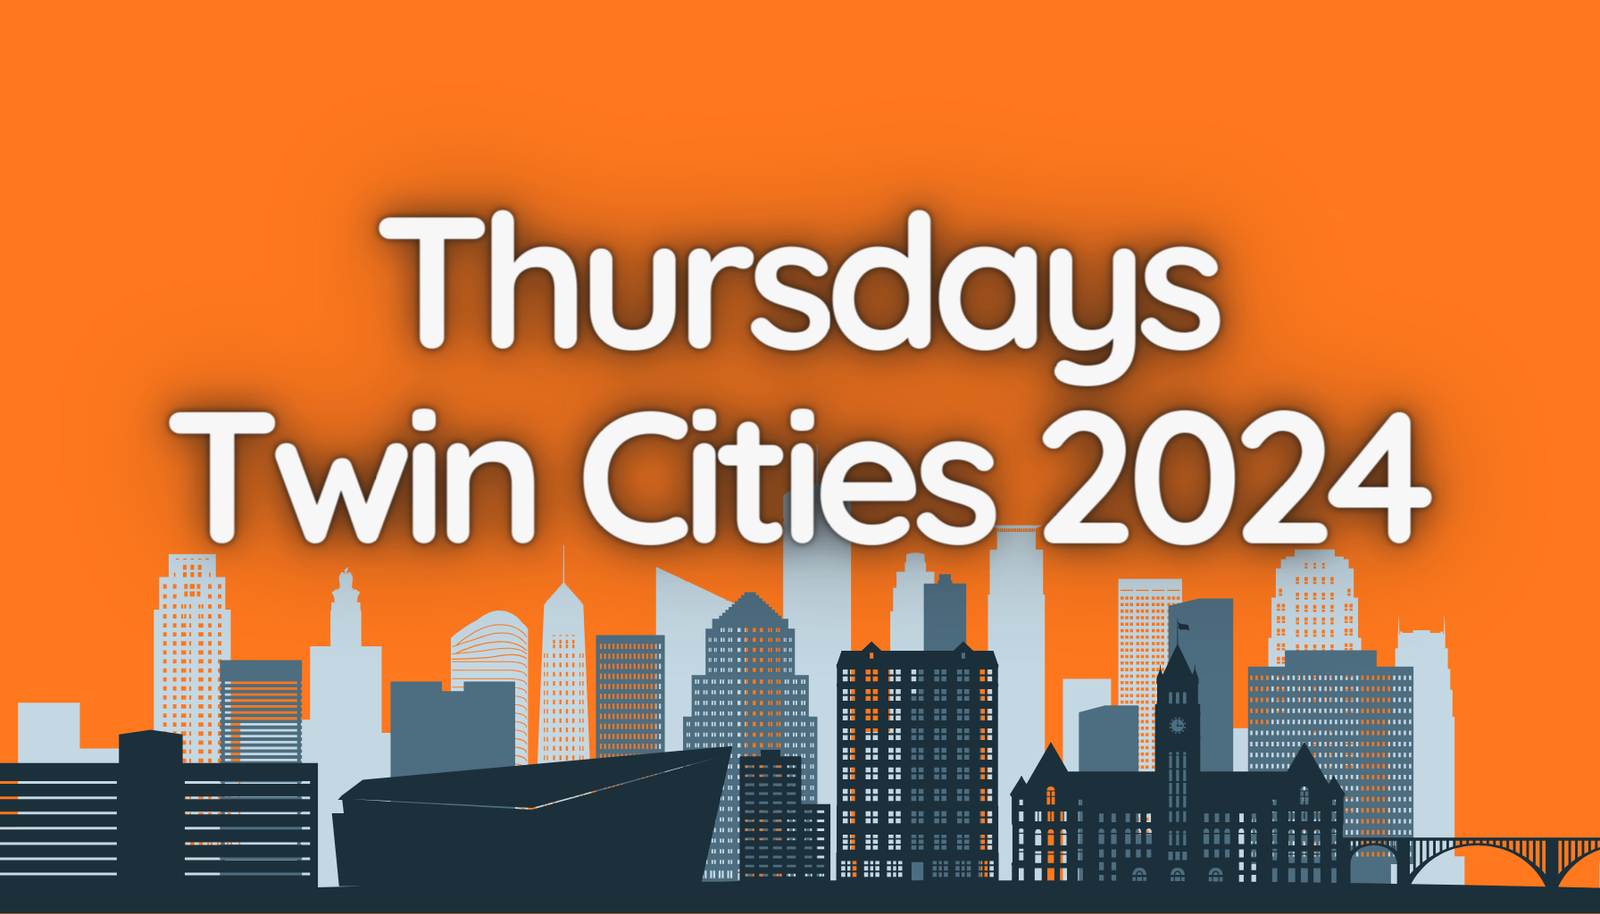 Best Things To Do in the Twin Cities on Thursdays 2024